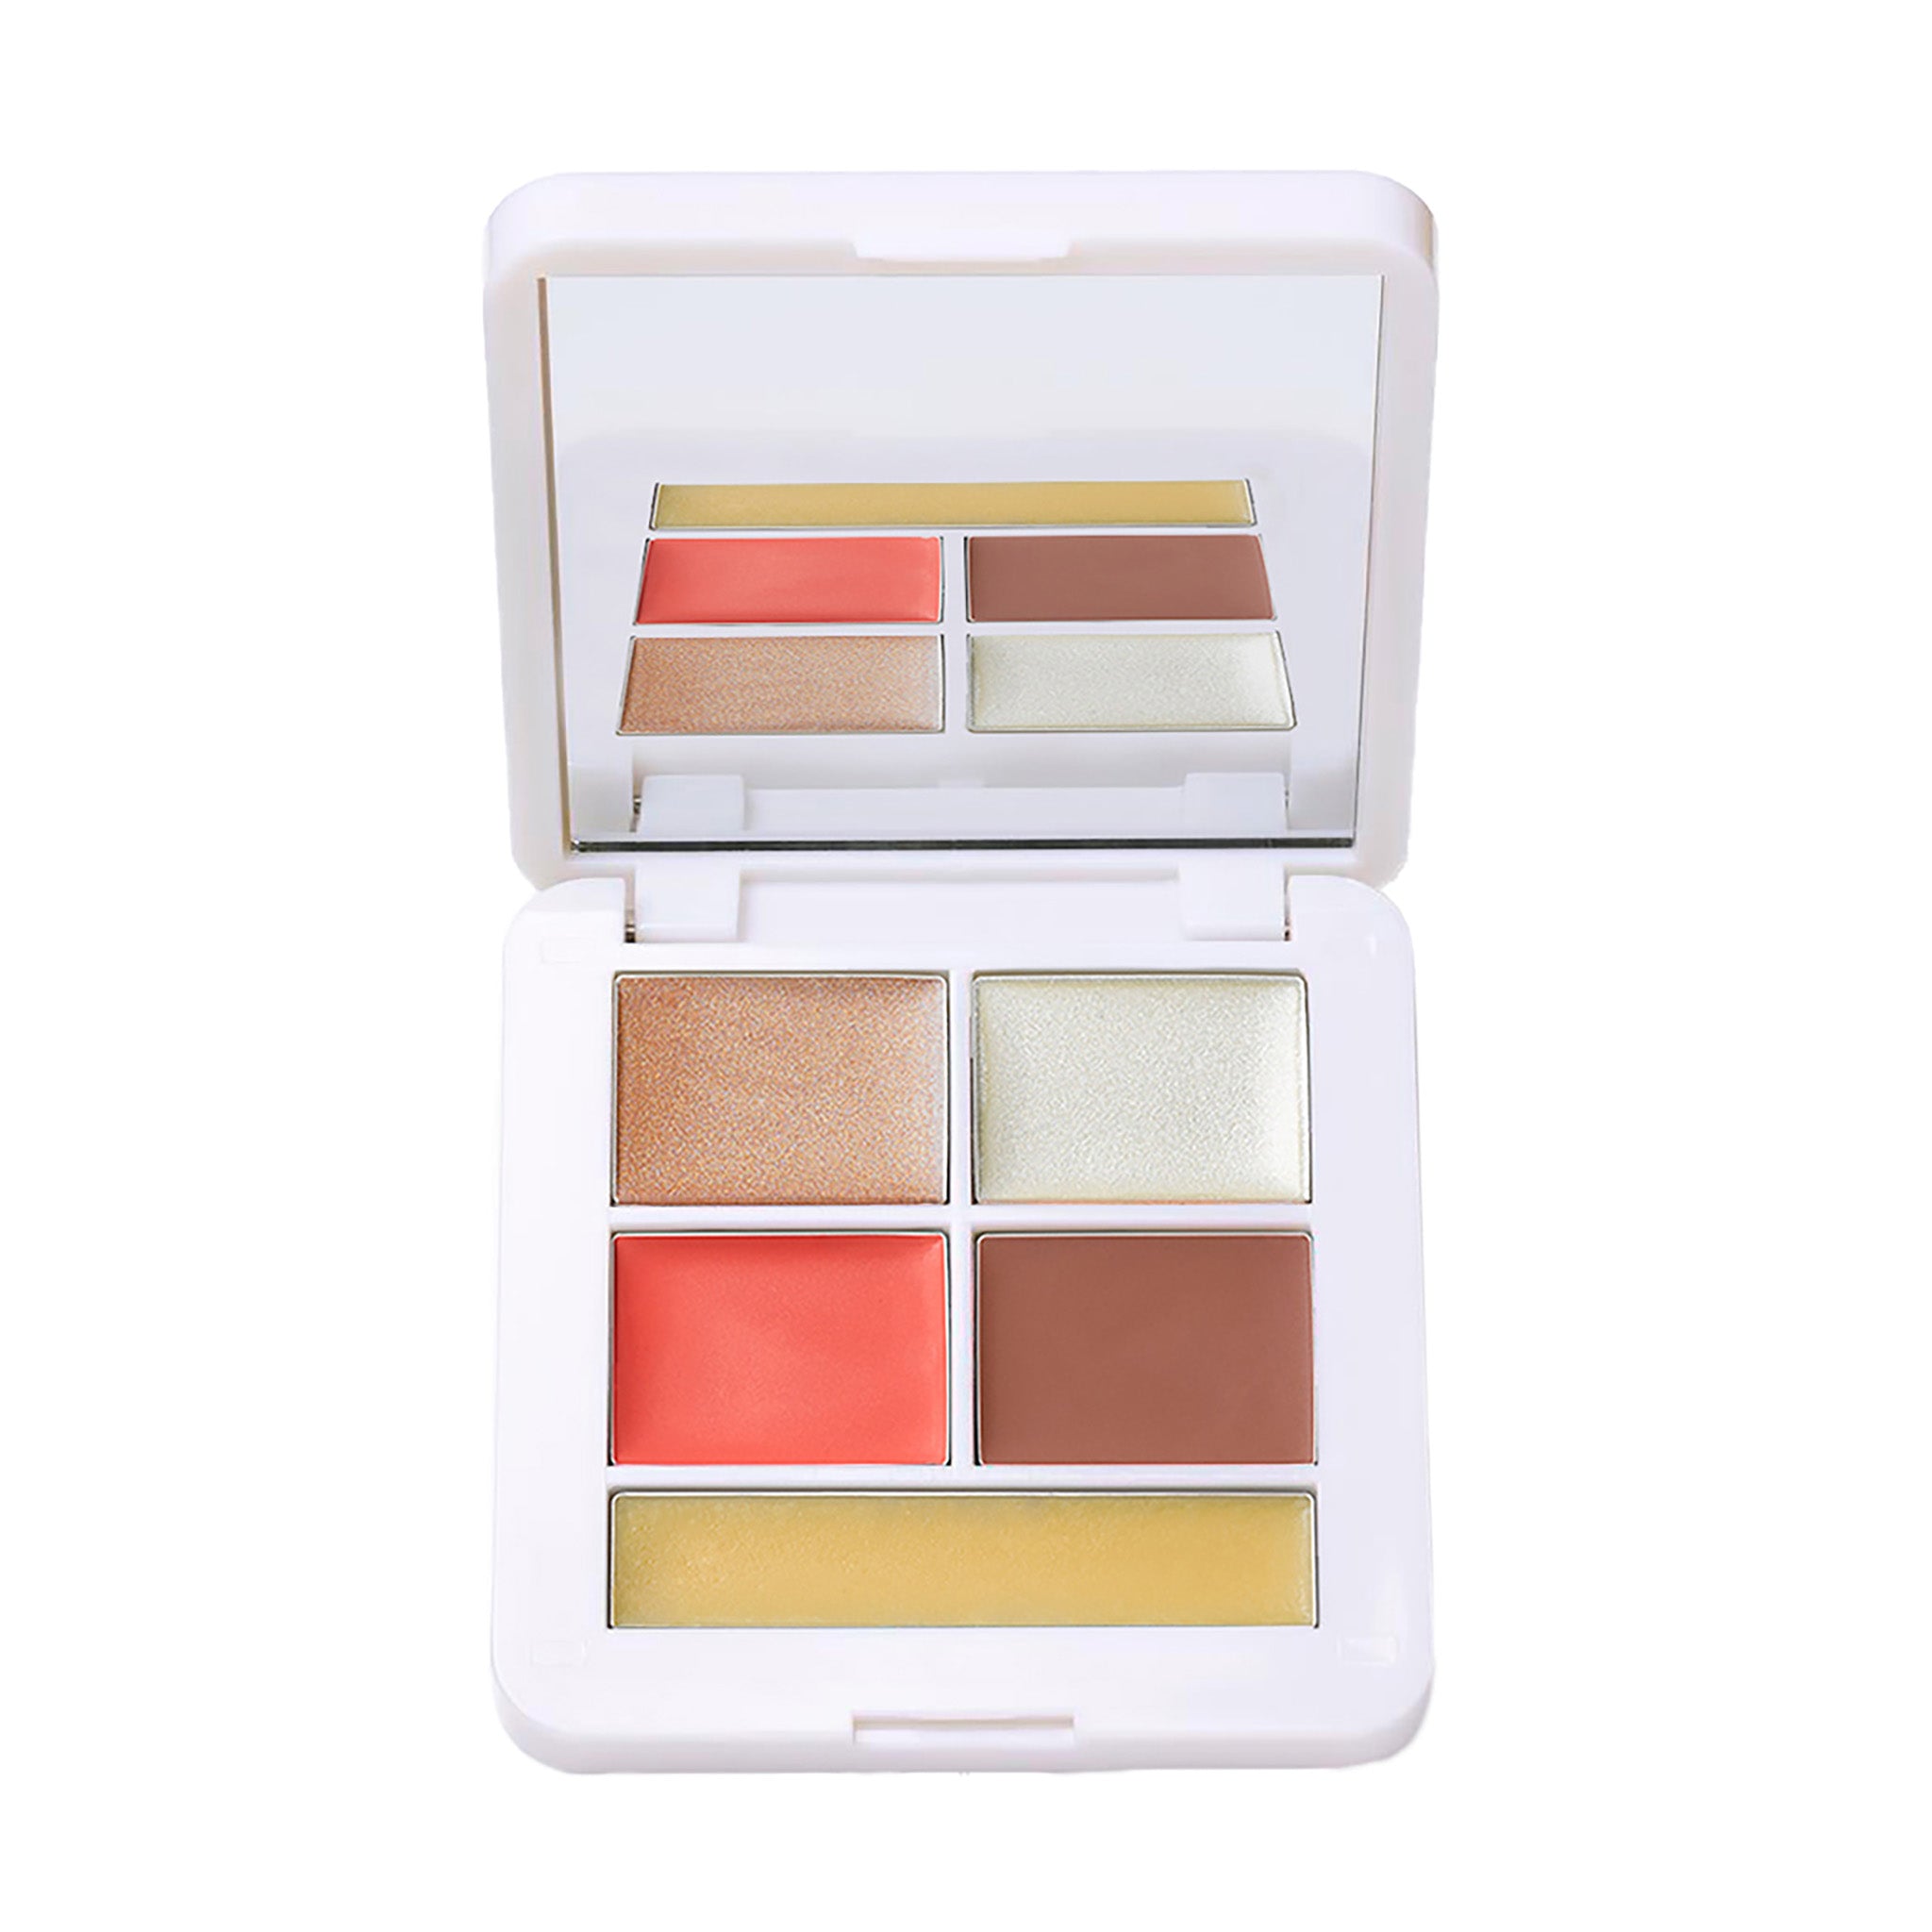 RMS Beauty Naturally Perfect Palettes from RMS Beauty